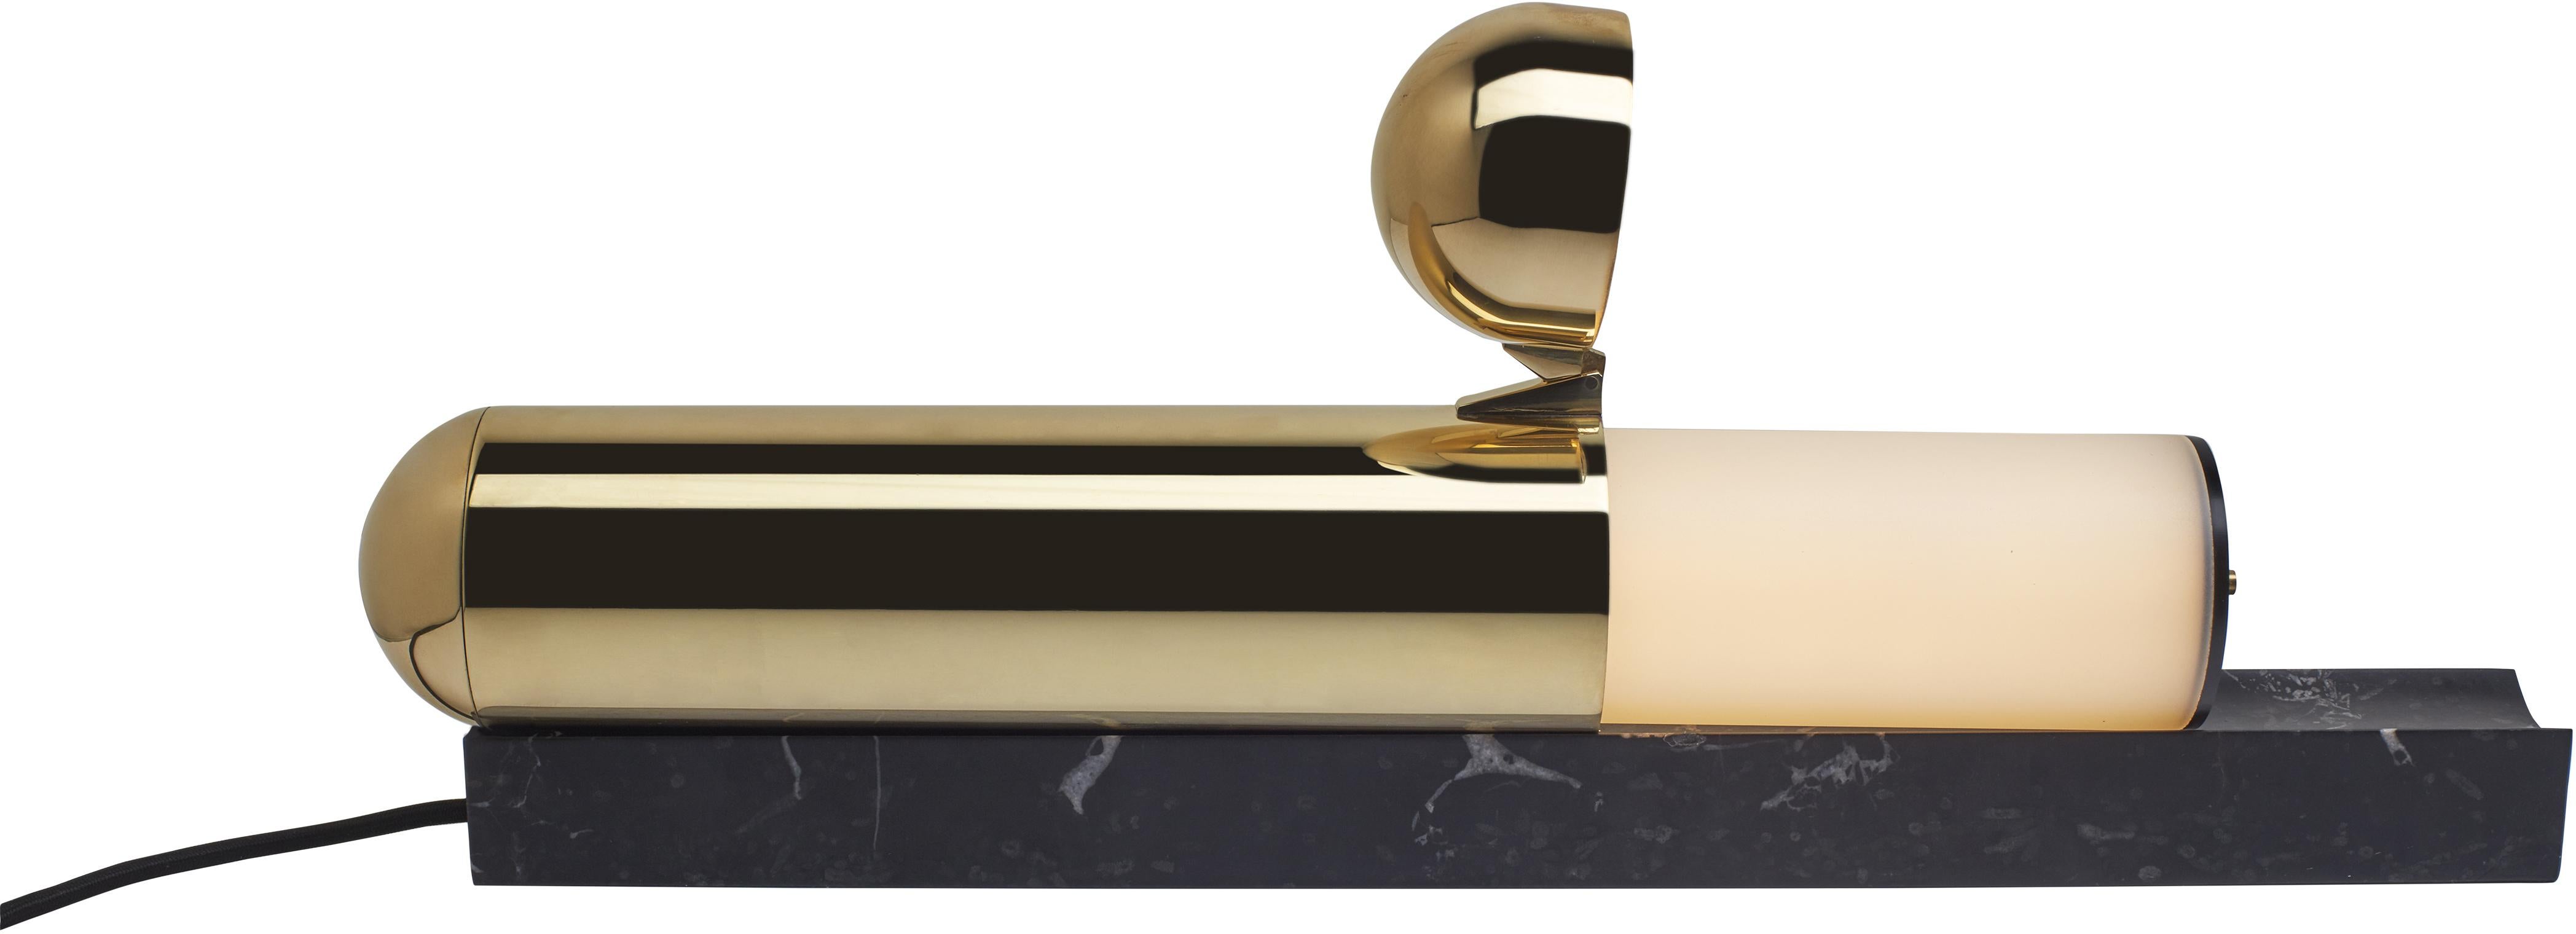 DCW Editions ISP Table Lamp in Brass w/Black Marble by Ilia Sergeevich Potemine In New Condition For Sale In Brooklyn, NY